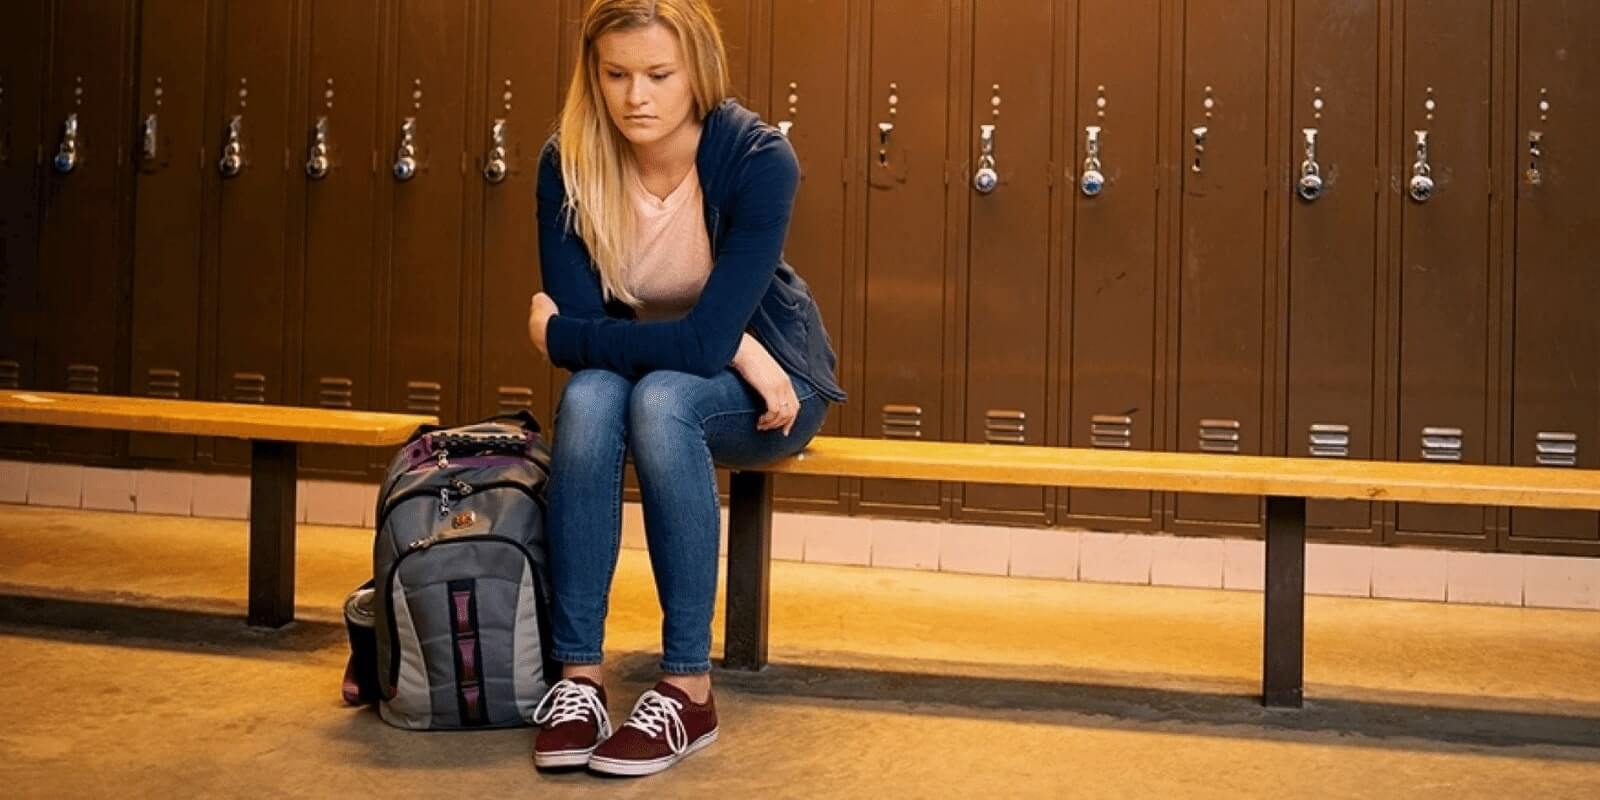 A teen girl sitting alone in the locker room sadly